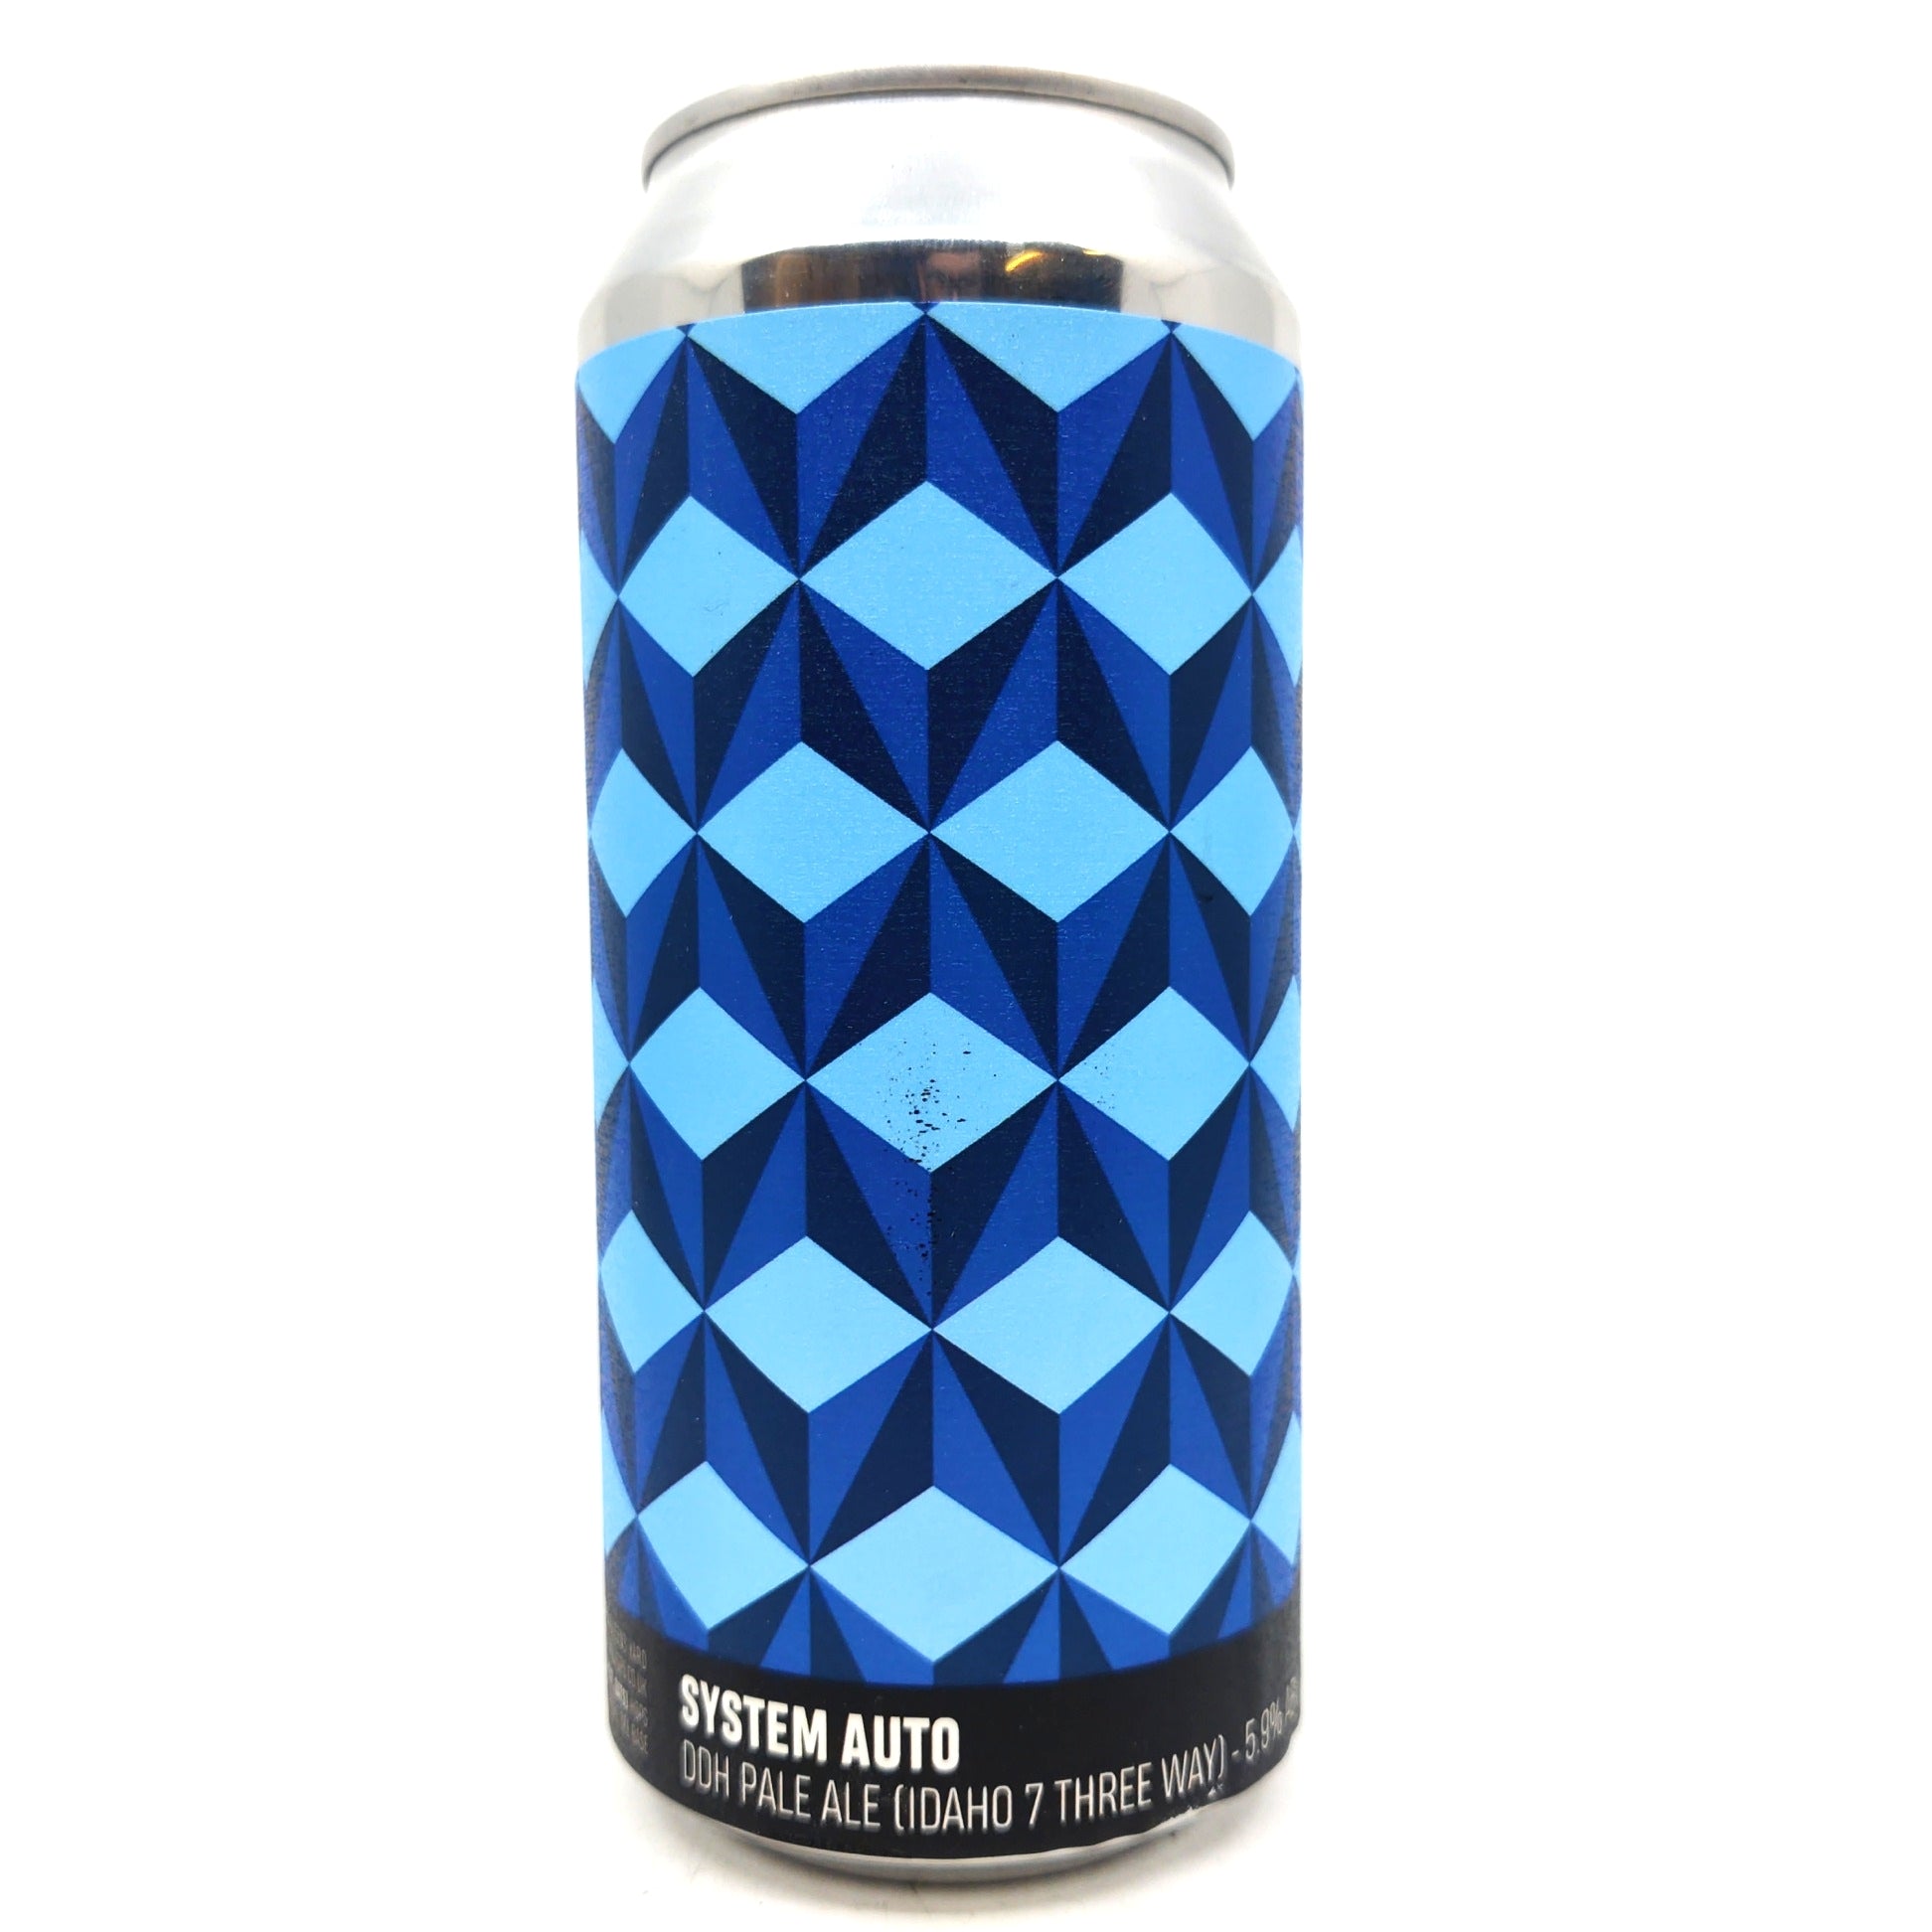 Howling Hops System Auto DDH Pale Ale 5.9% (440ml can)-Hop Burns & Black